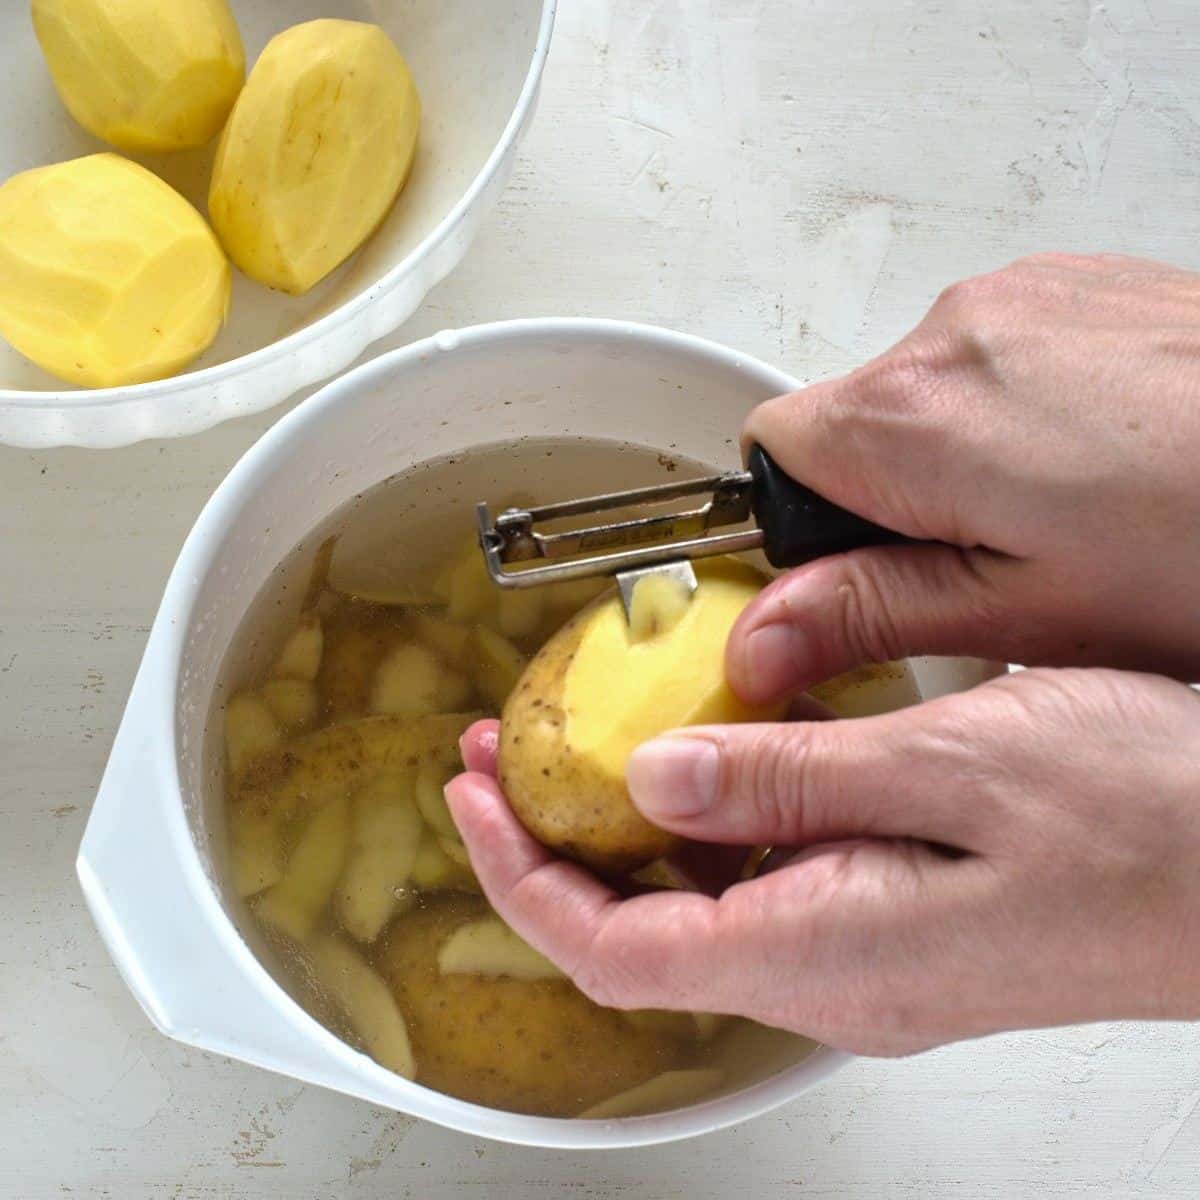 Removing blemishes from the top layer of a potato.